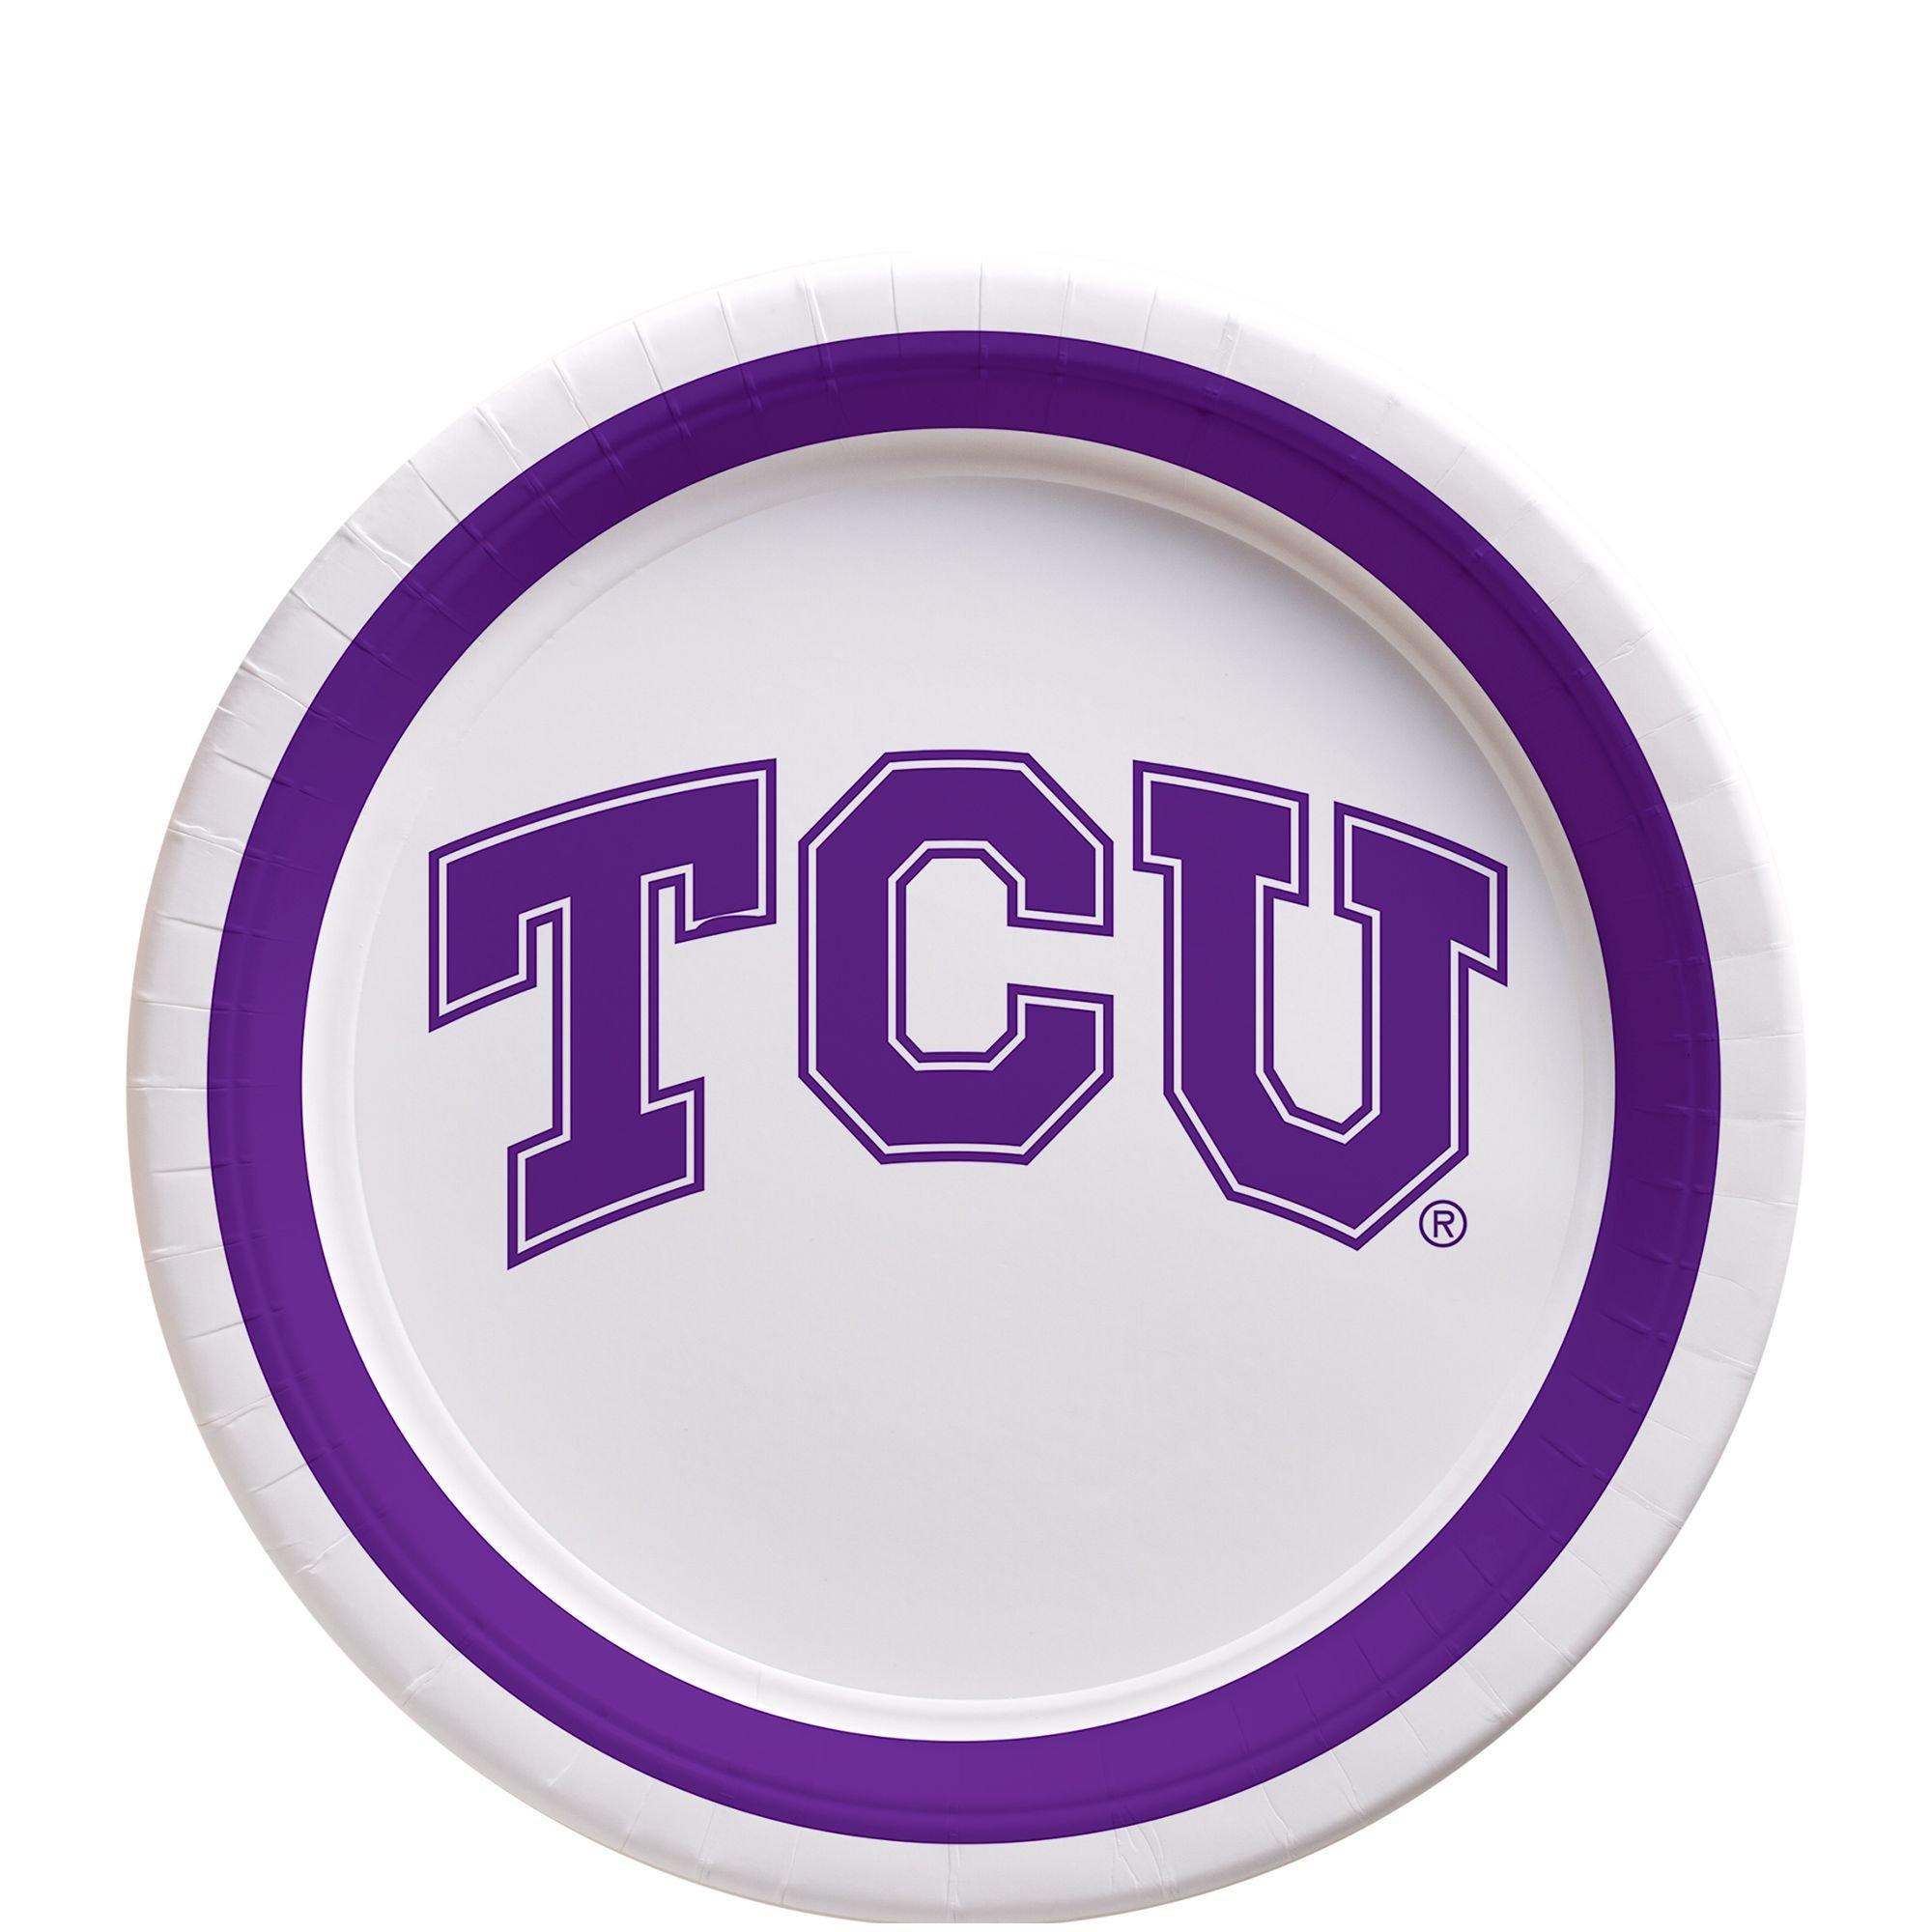 Tcu Horned Frogs Dessert Plates 12ct Party City